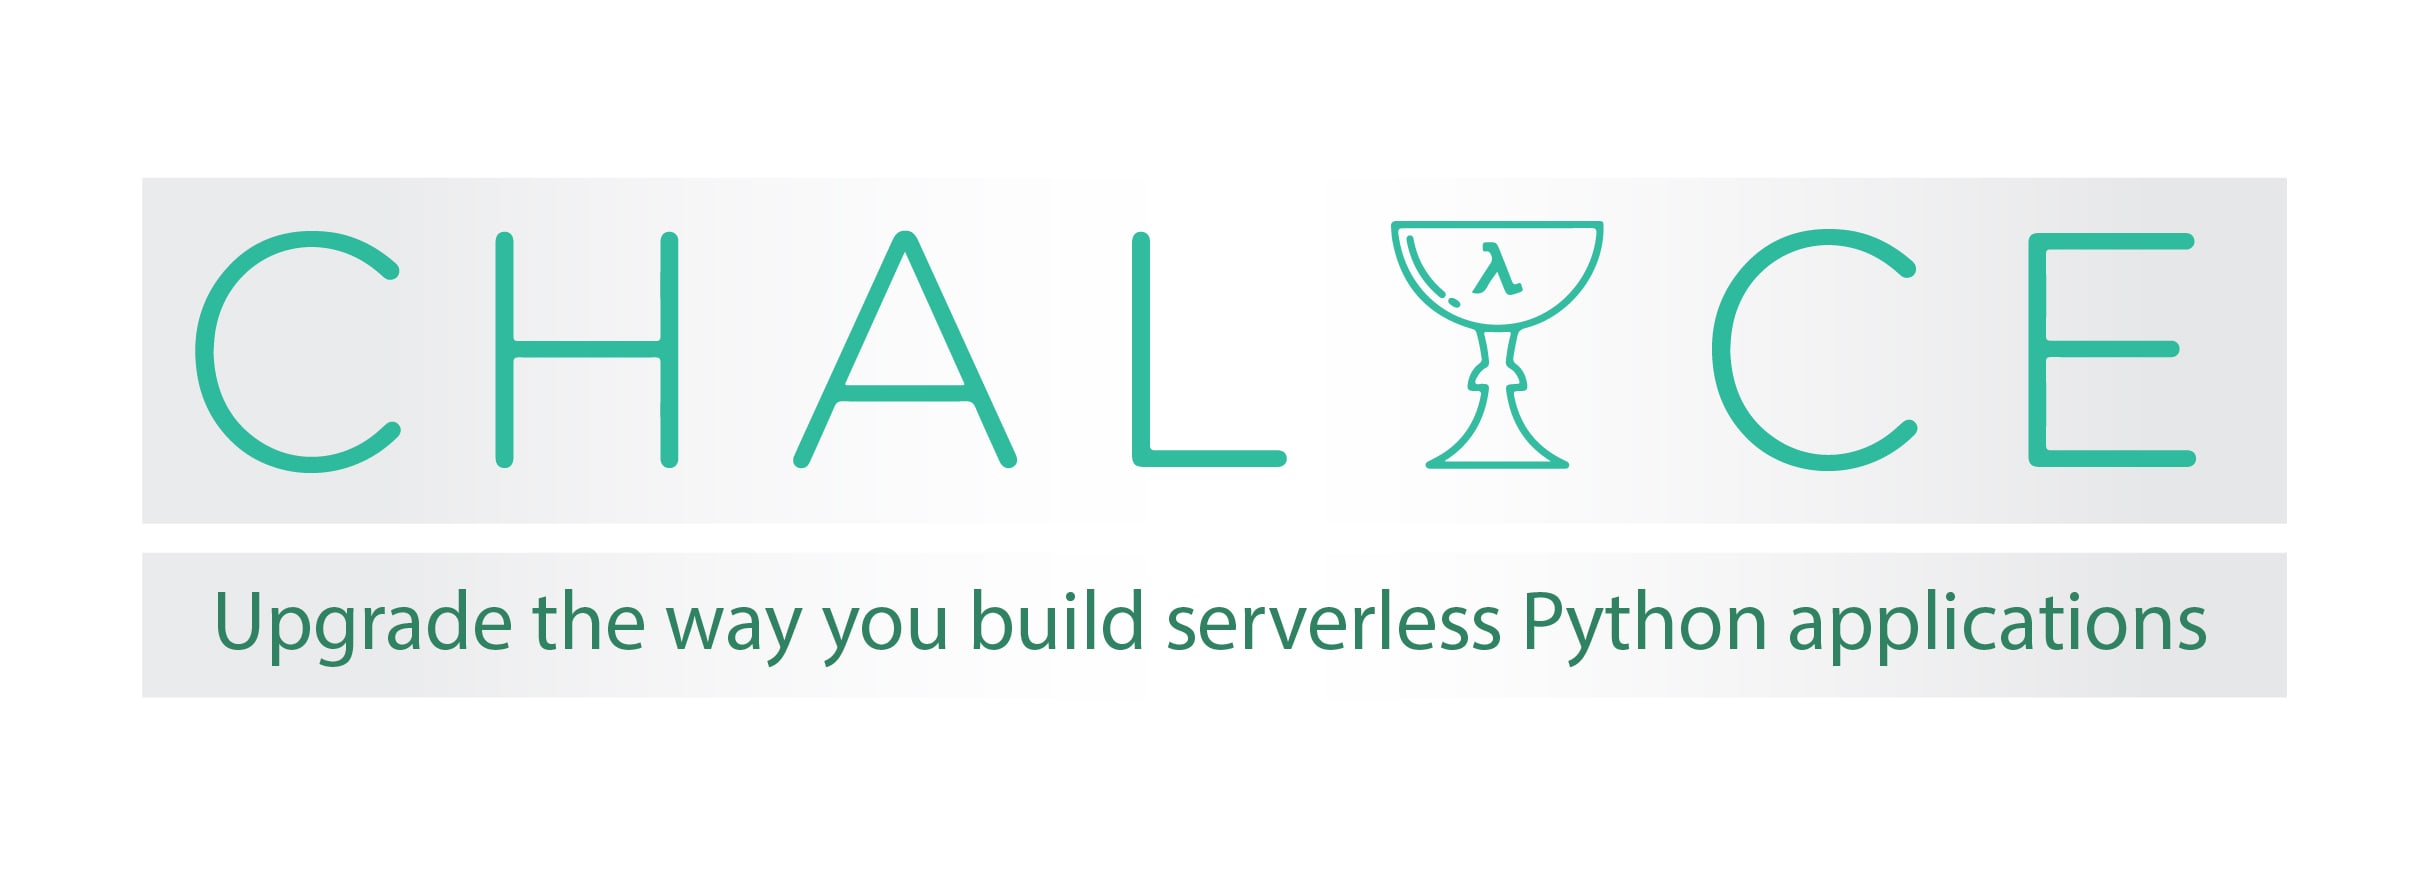 Chalice. Upgrade the way you build serverless Python applications.